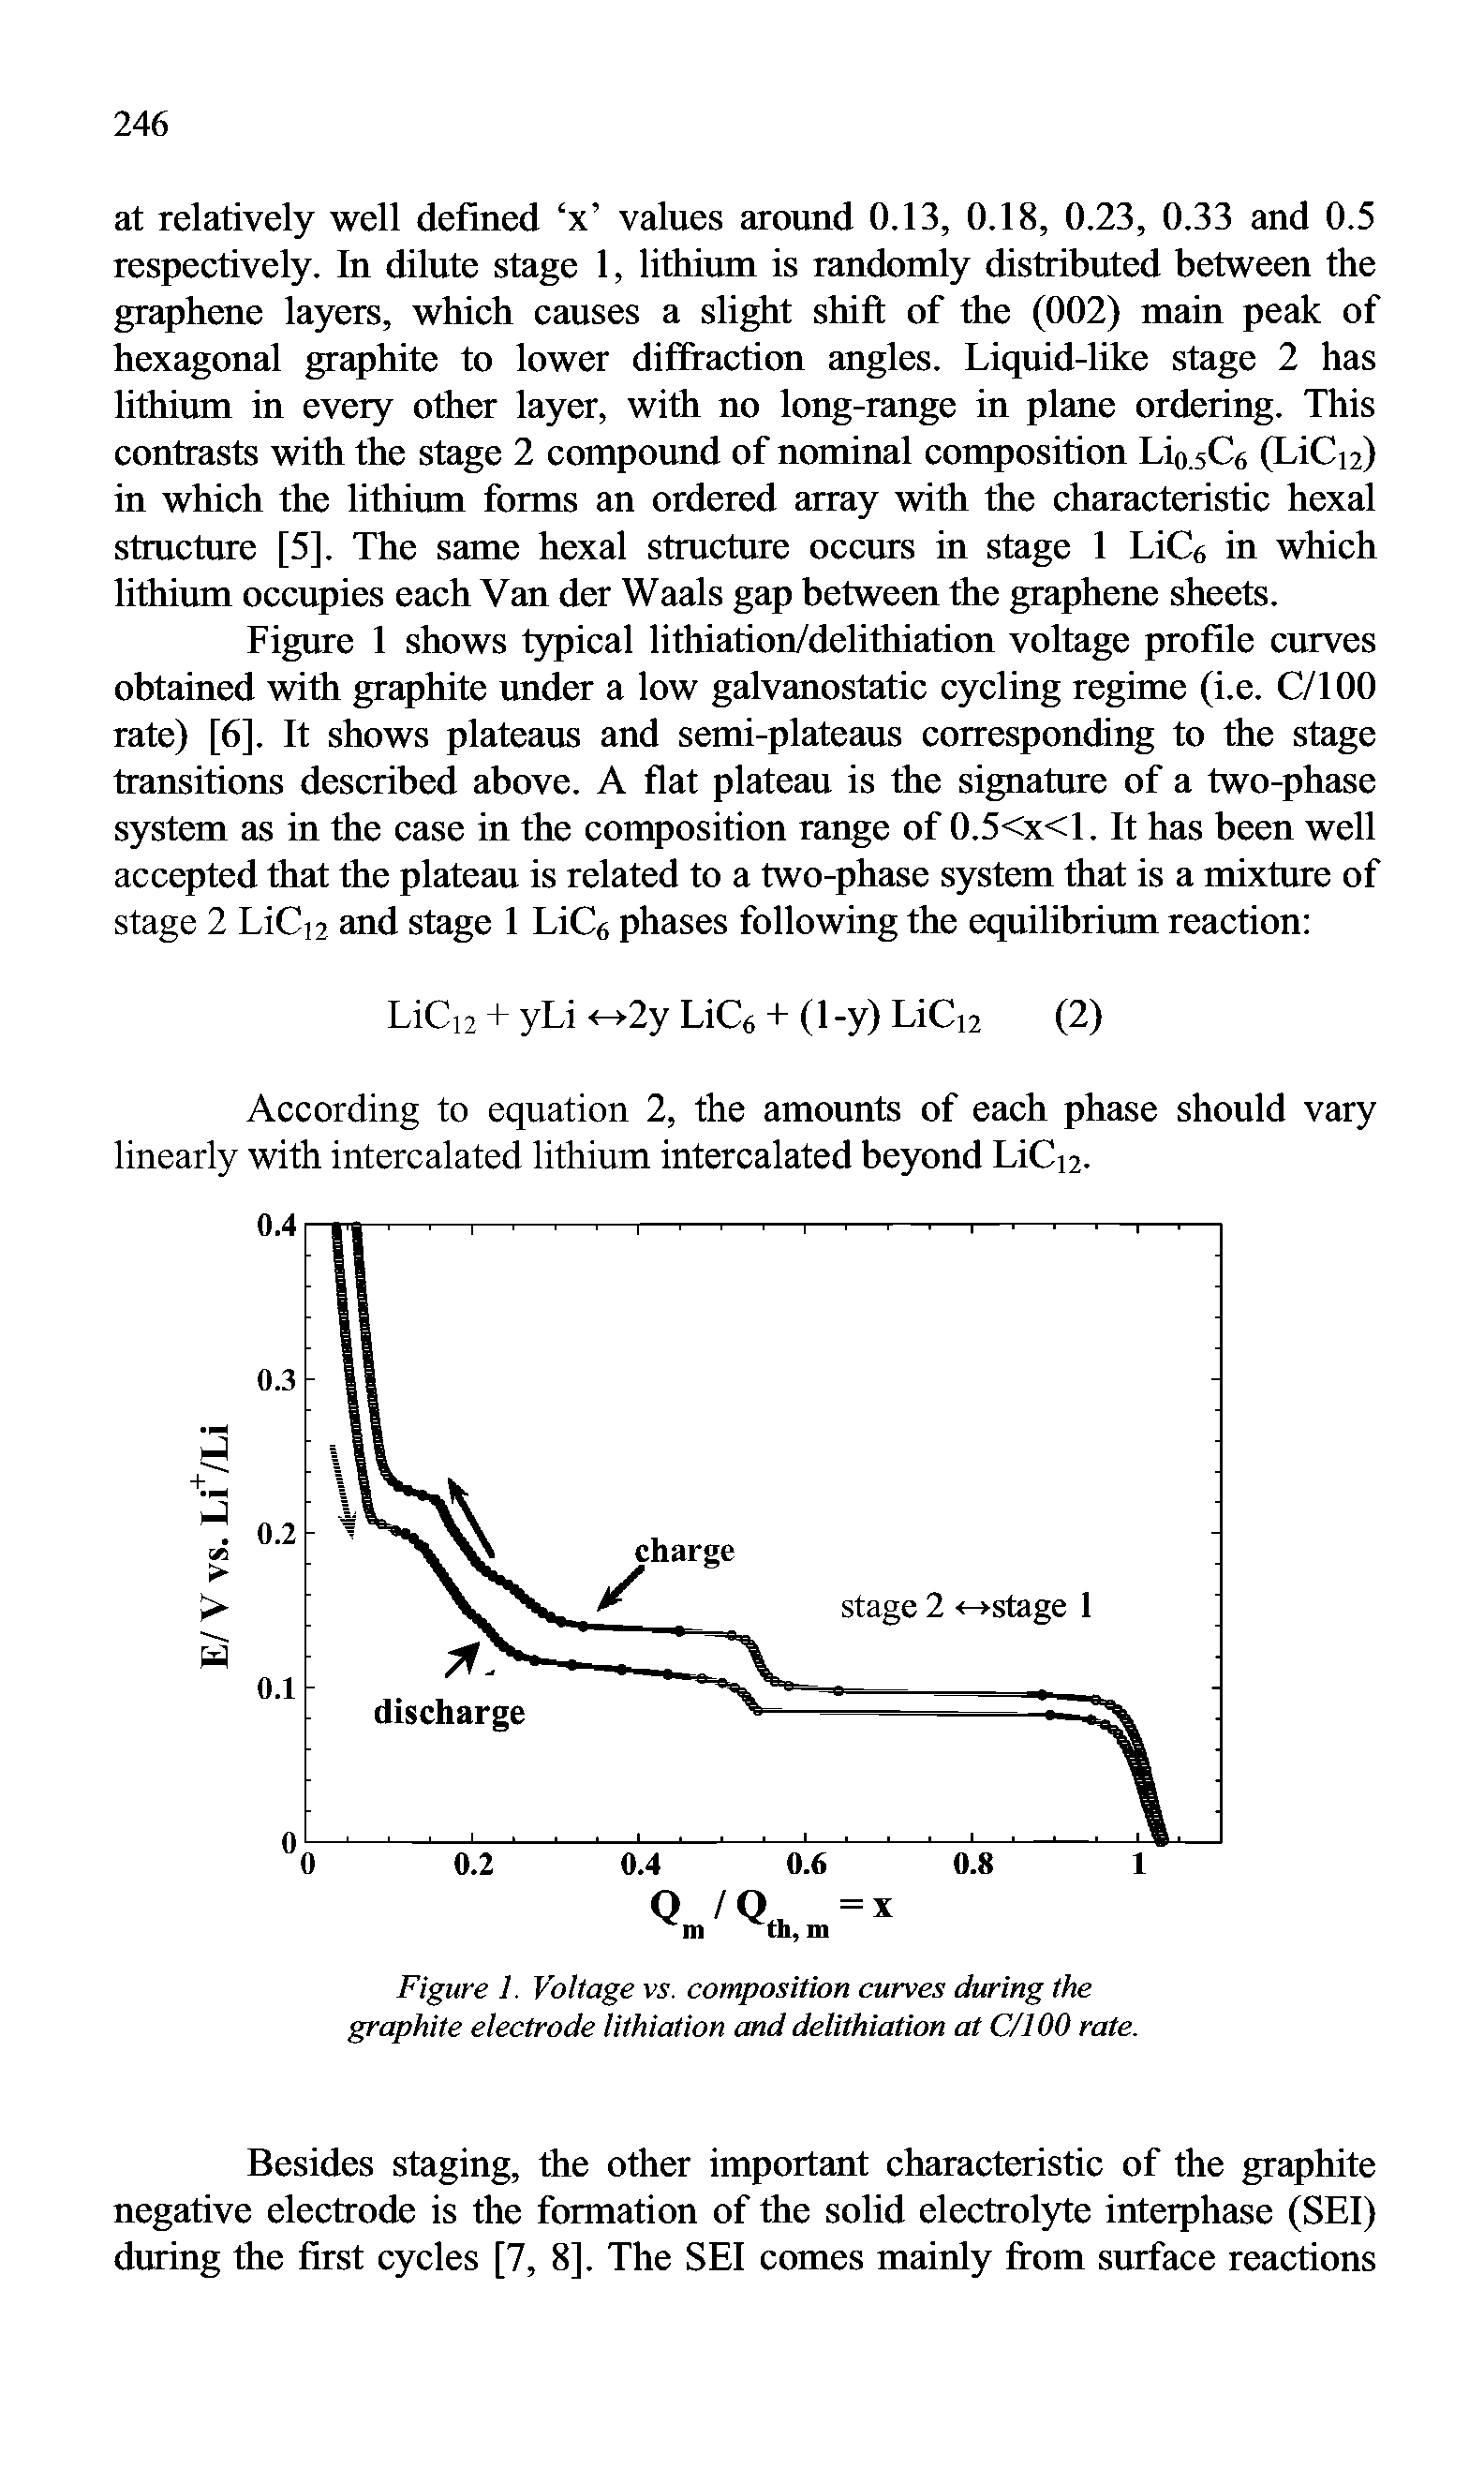 Figure 1. Voltage vs. composition curves during the graphite electrode lithiation and delithiation at C/l00 rate.